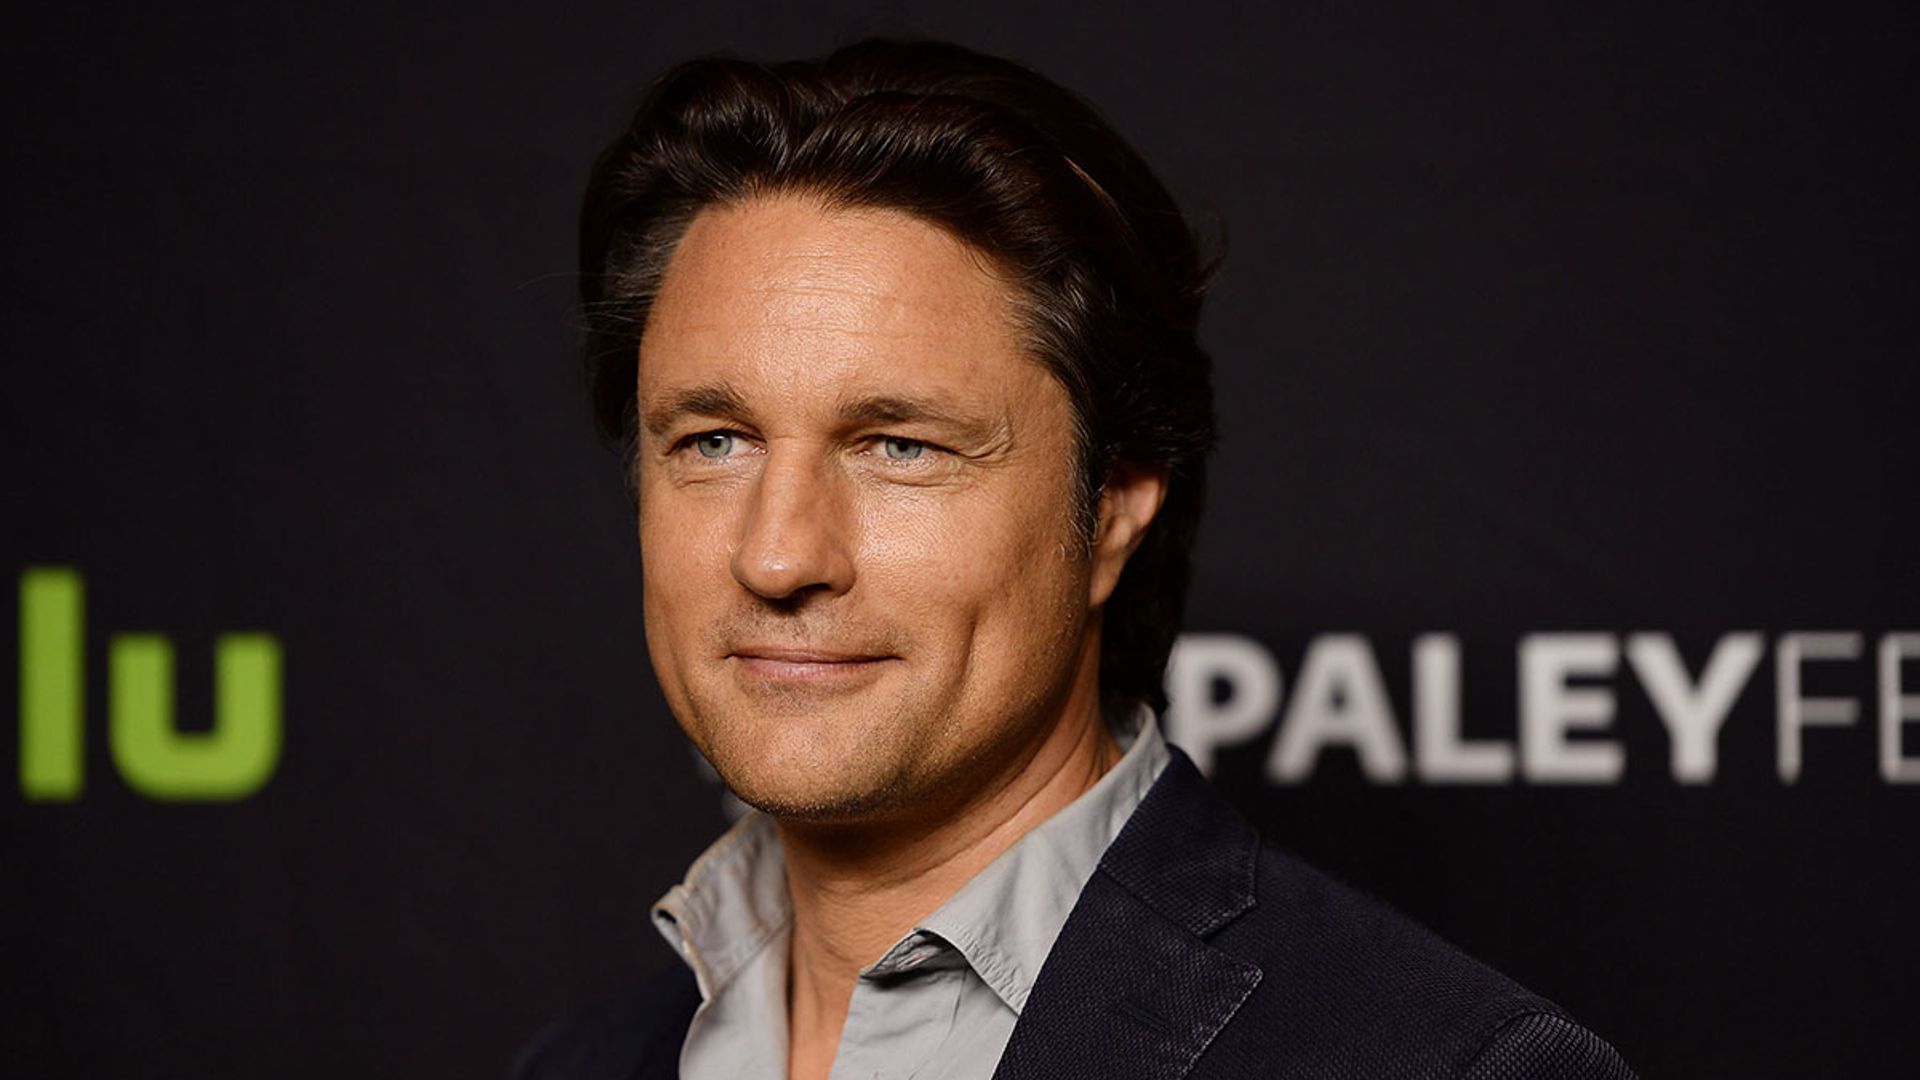 Martin Henderson steps away from Virgin River for new movie role